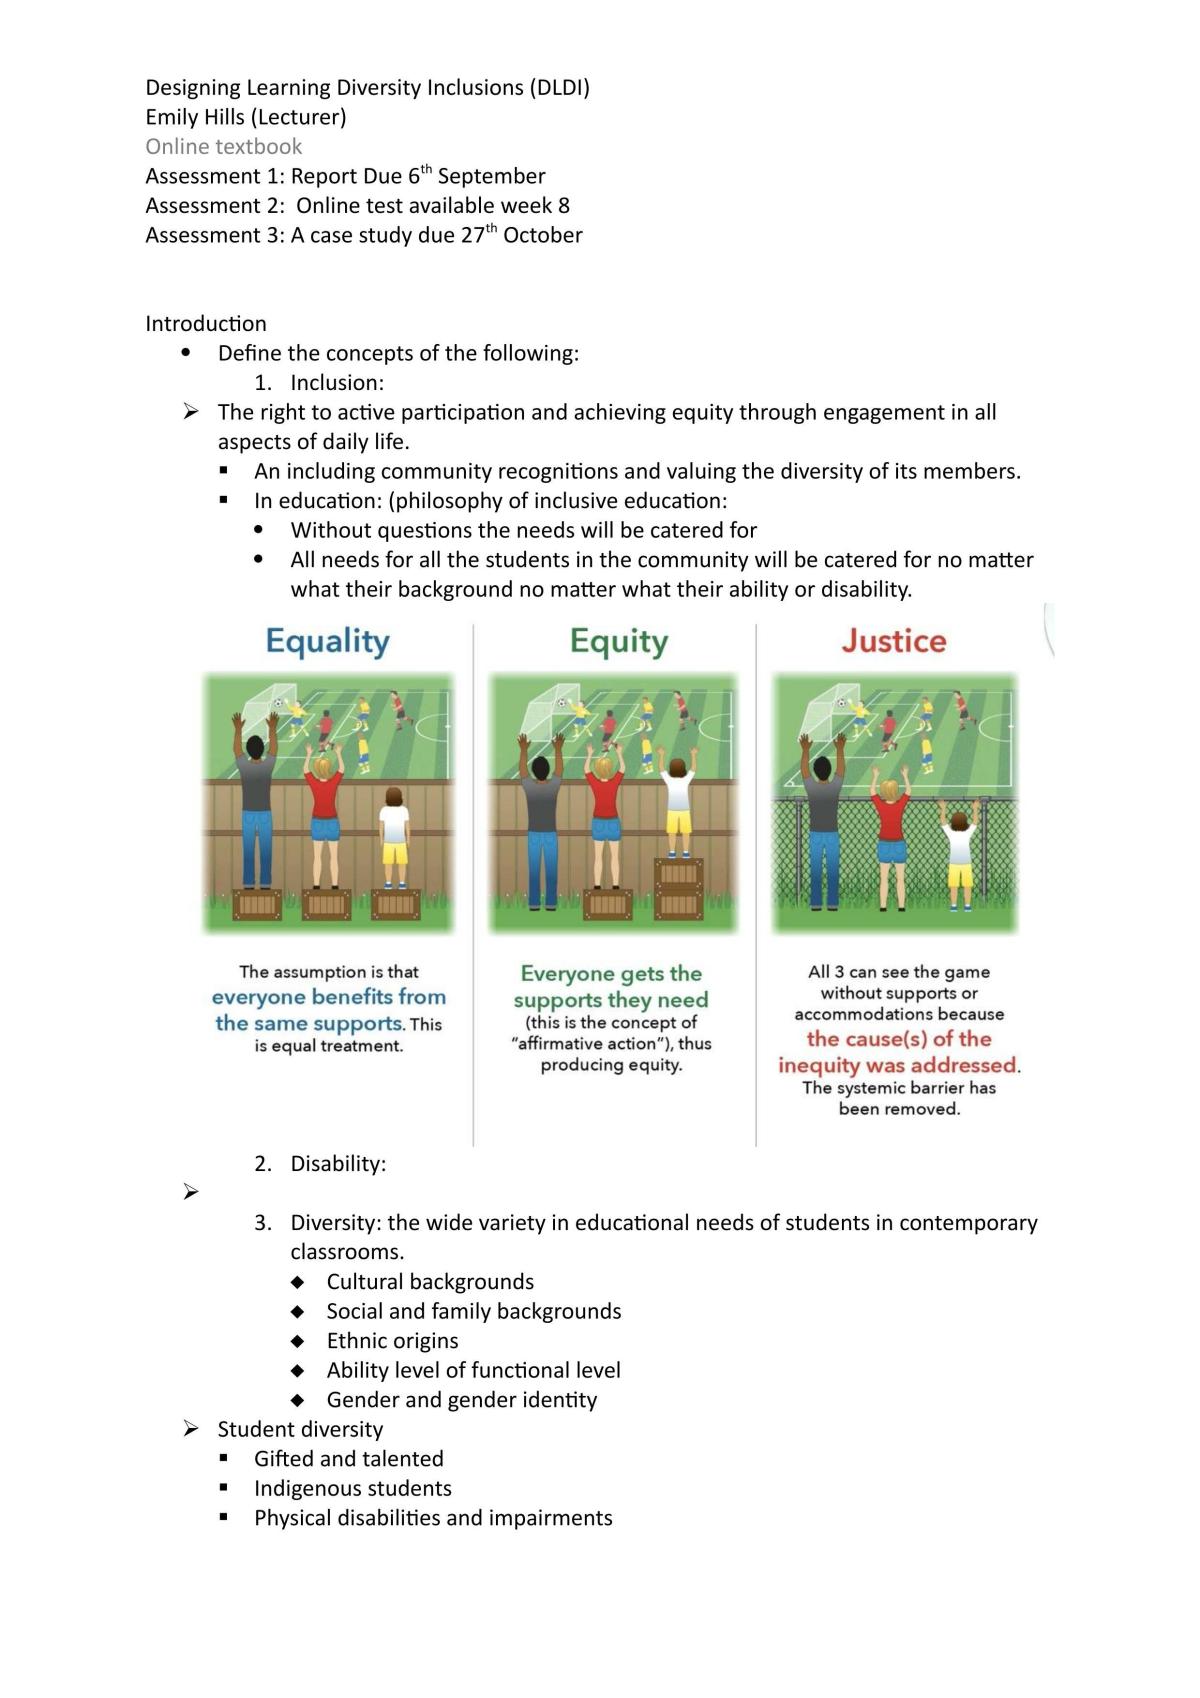 Designing Learning for Diversity and Inclusion Notes - Page 1